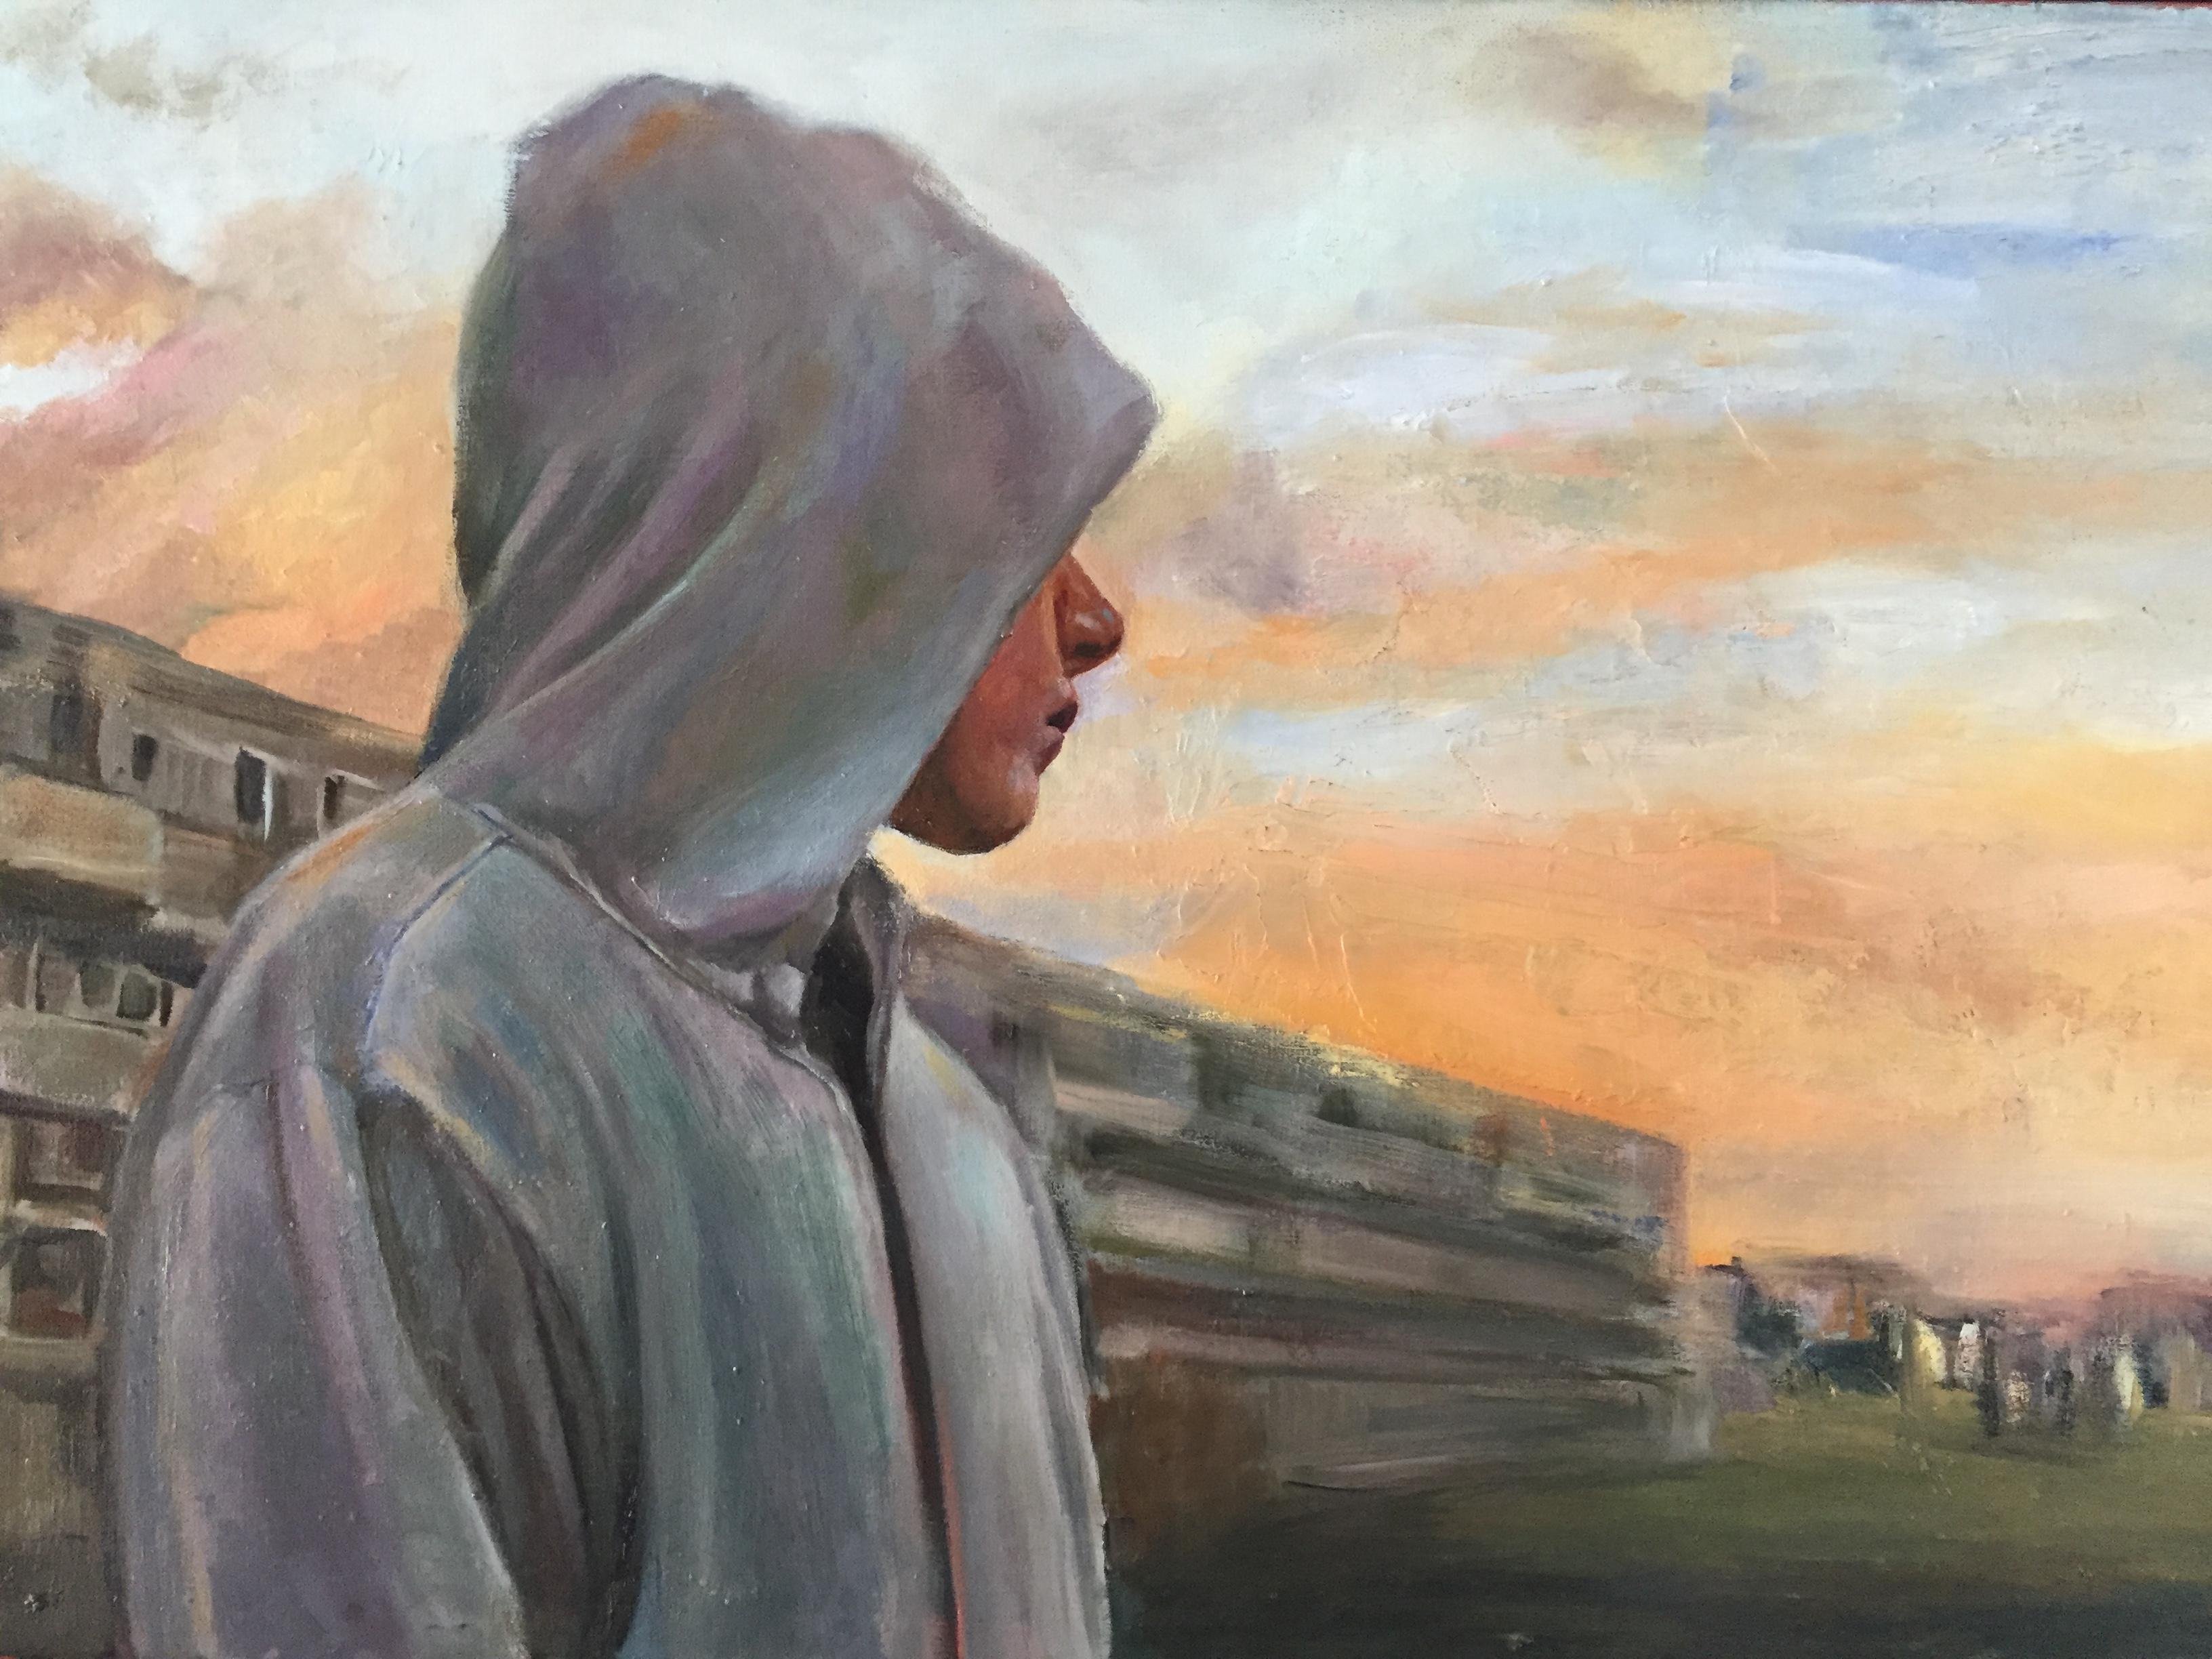 David van der Linden Figurative Painting - Thursday's Child-  21st Century Dutch Contemporary Painting of a boy with Hoody